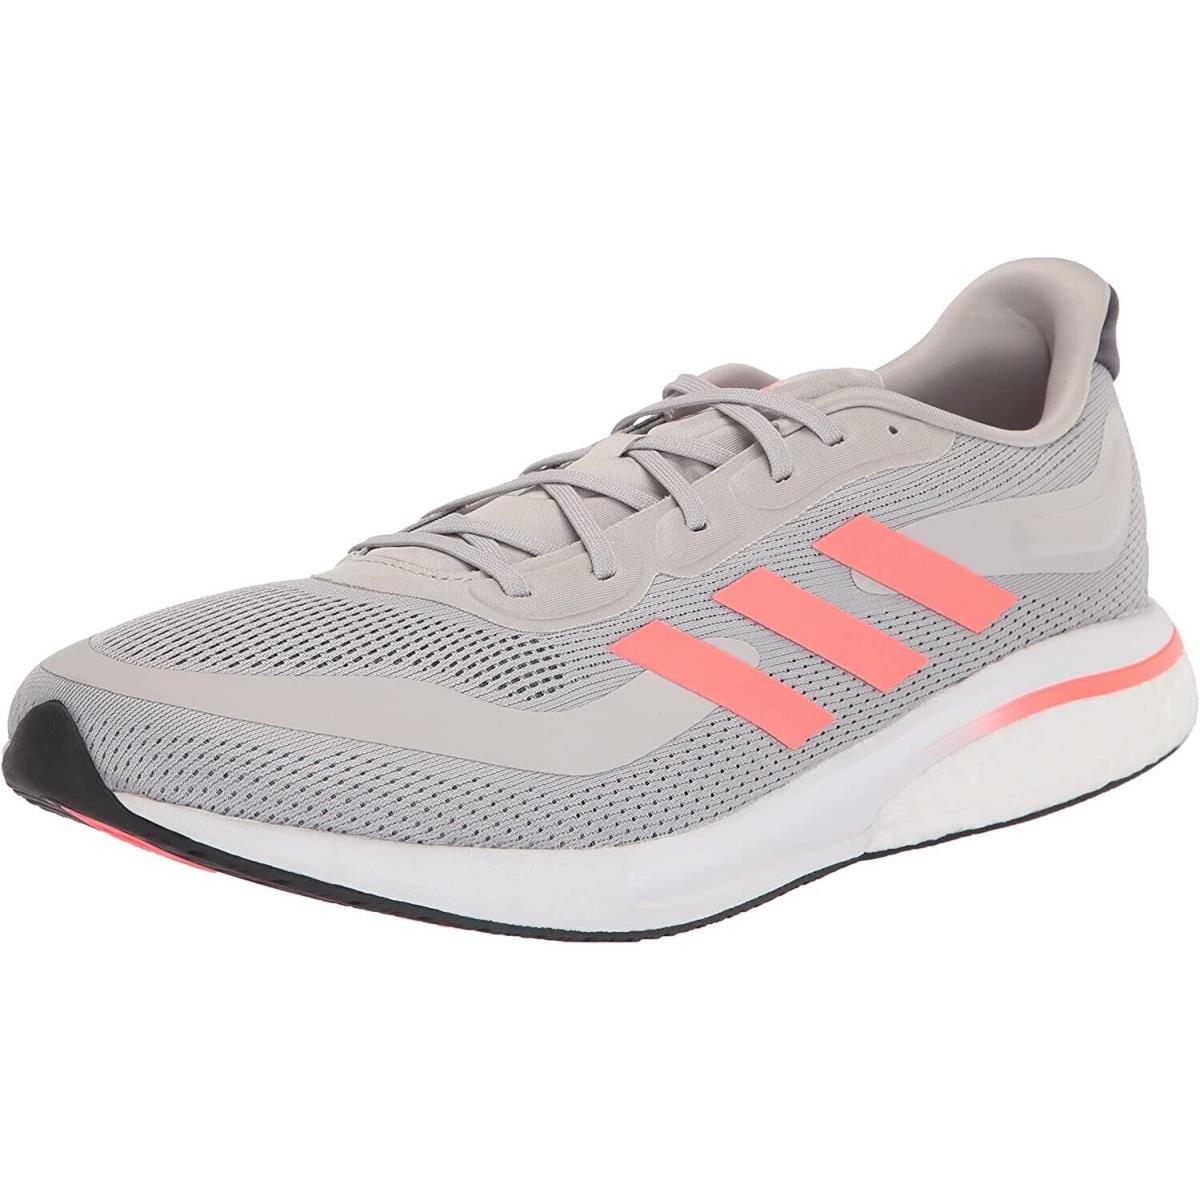 Adidas Men`s Supernova M Running Shoe JX2961 Size 9 US IN The Box - Grey Two/Turbo/Grey Two